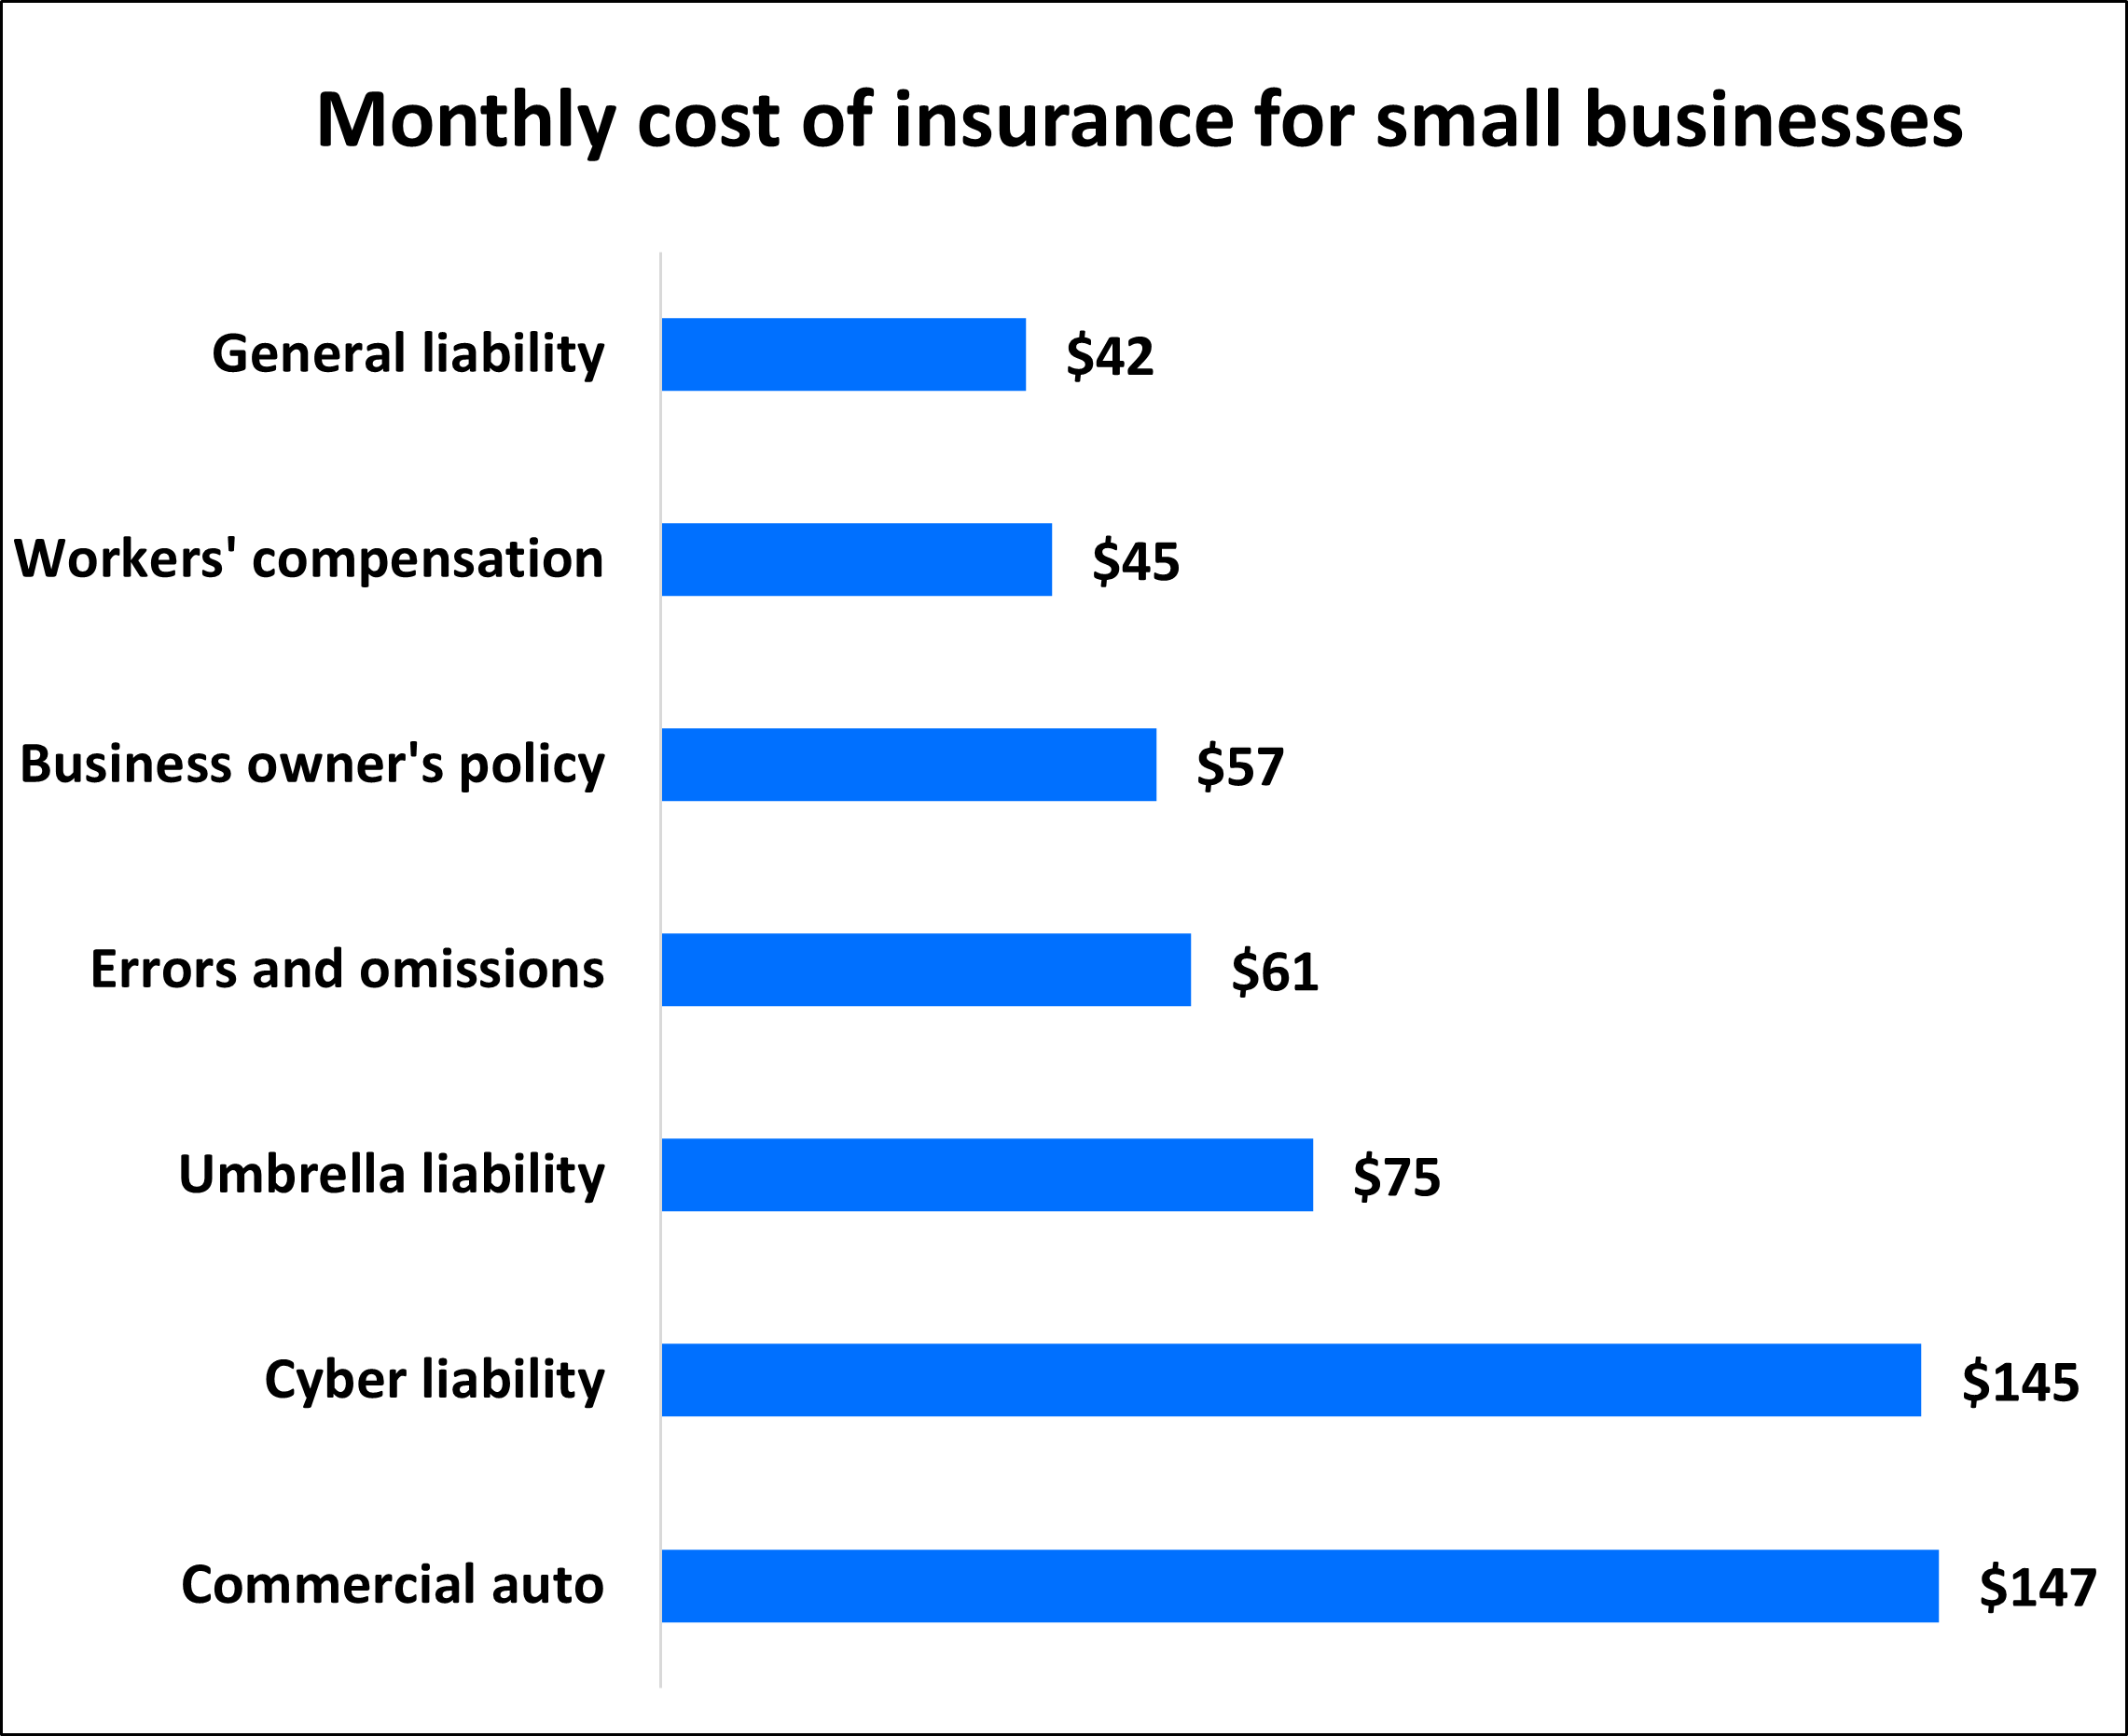 Average monthly cost of insurance for small businesses